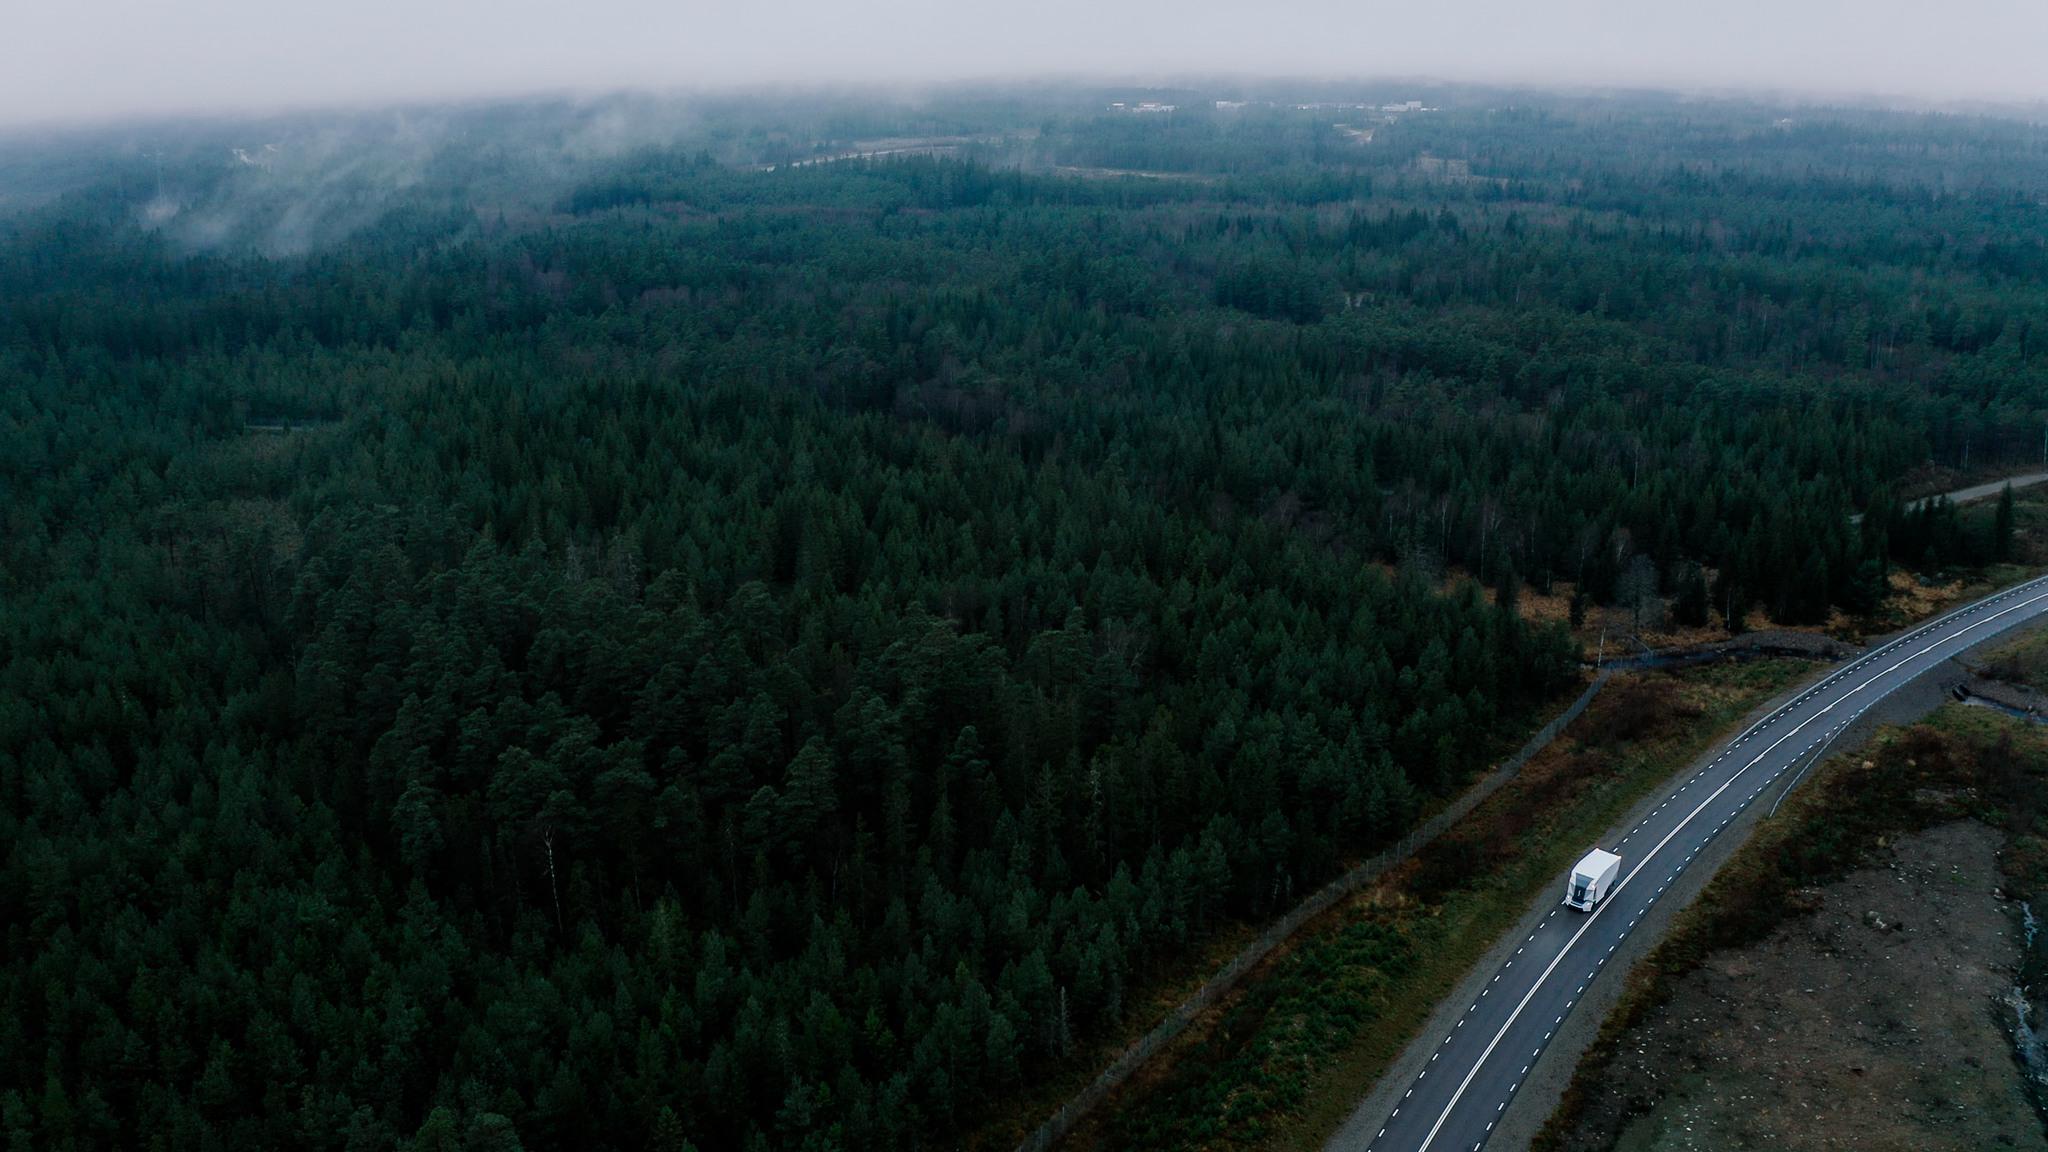 A drone shot of a white lorry on a road surroundes by woods.